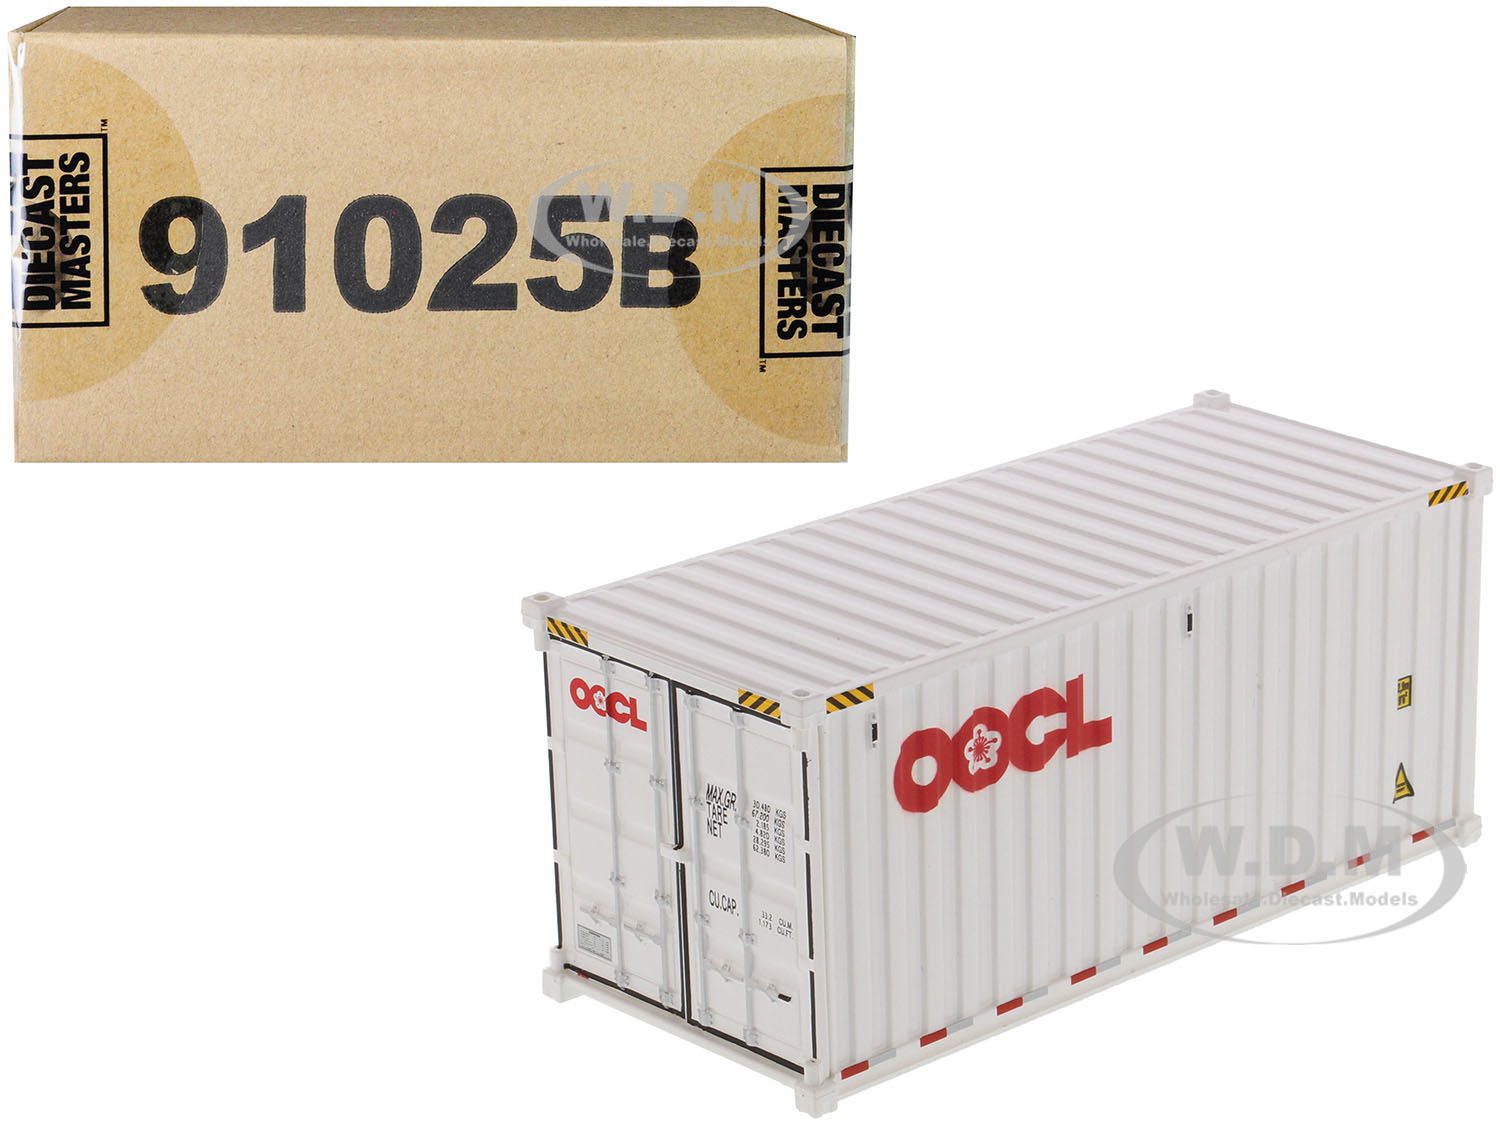 20 Dry Goods Sea Container "OOCL" White "Transport Series" 1/50 Model by Diecast Masters